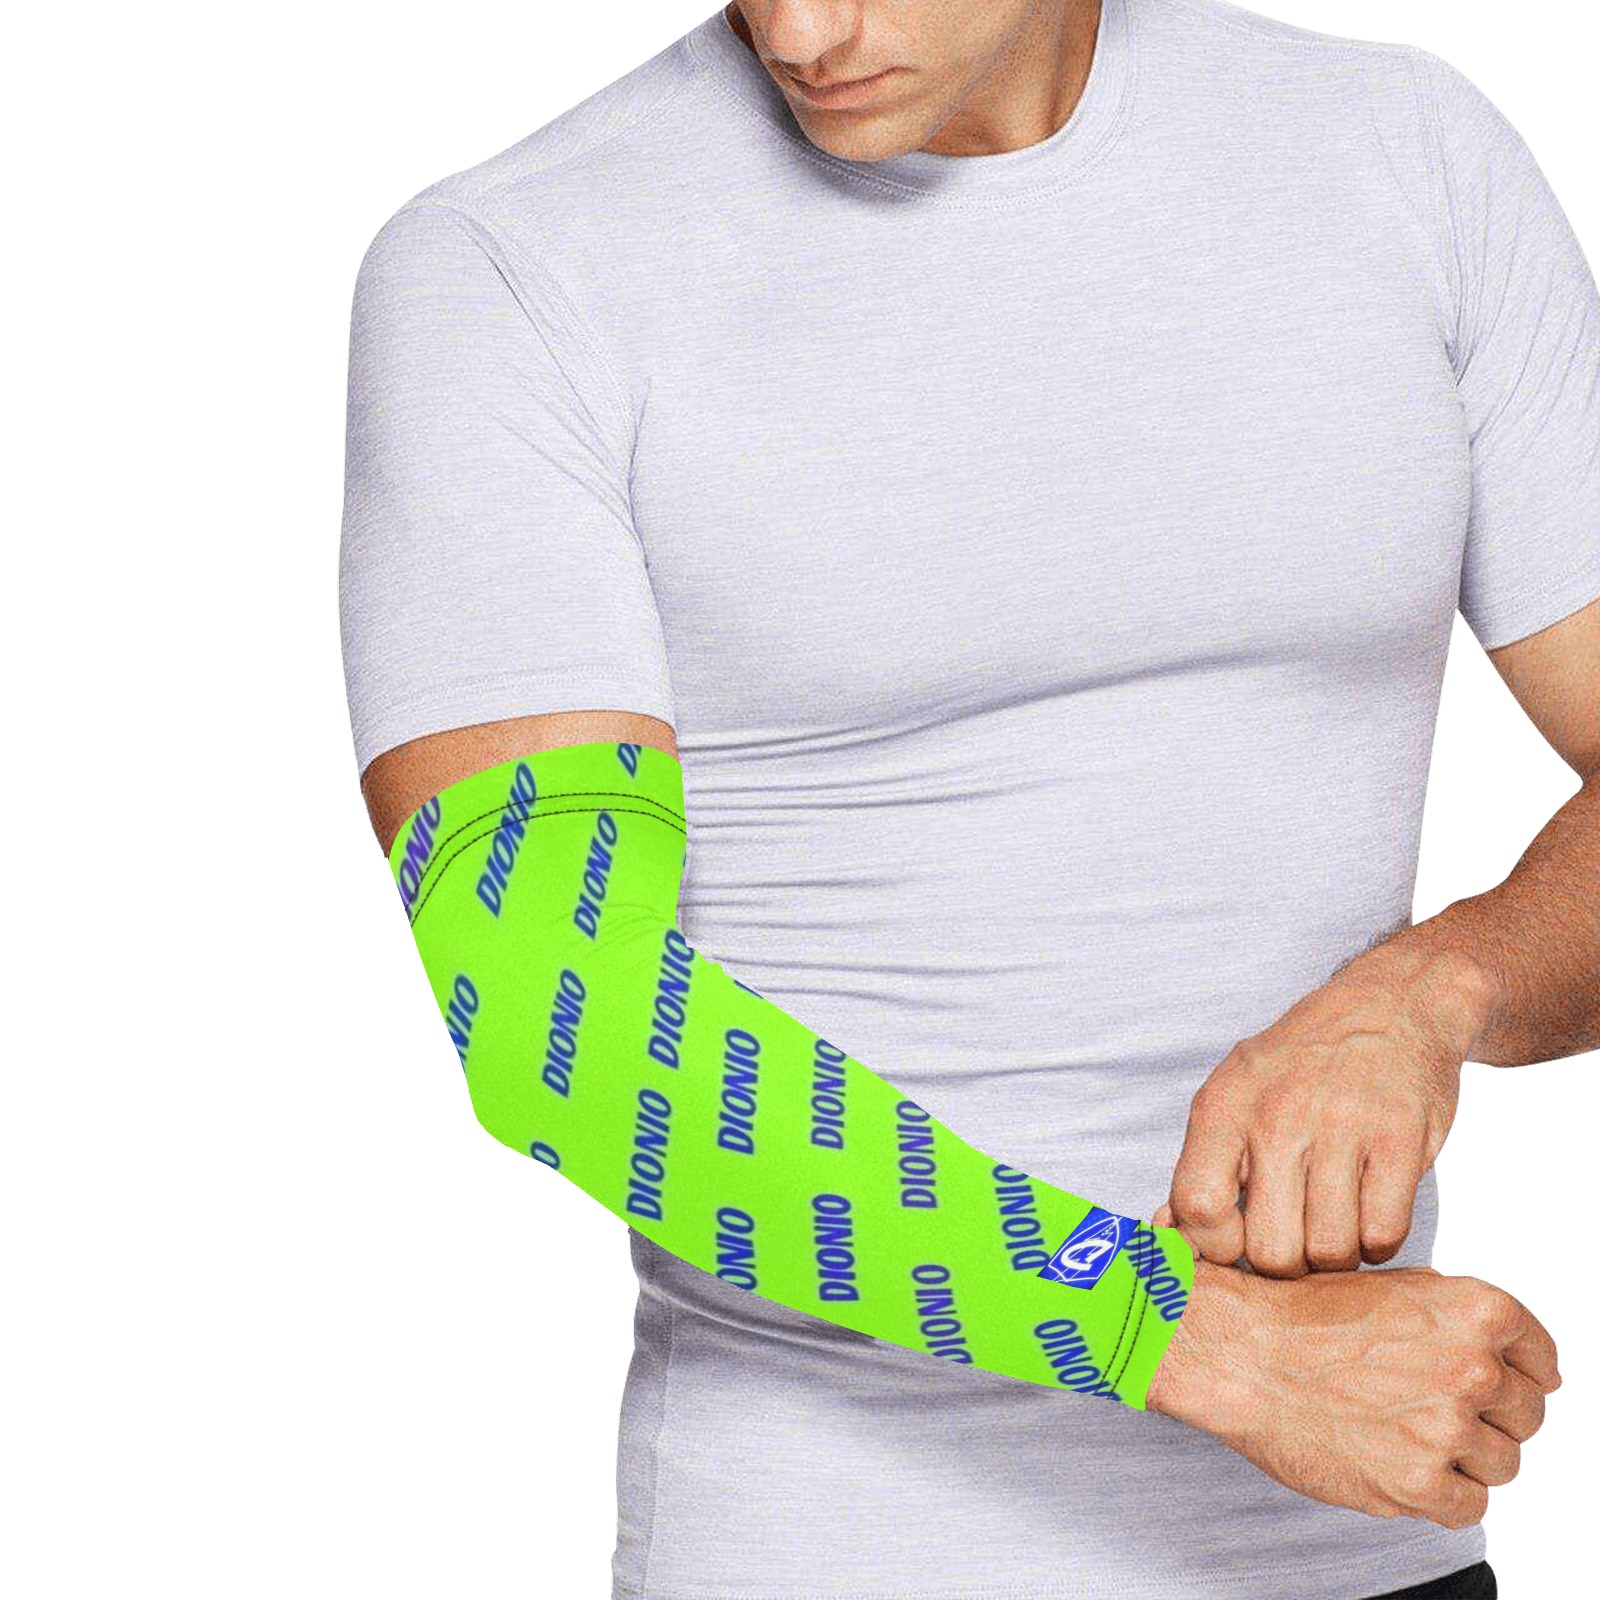 DIONIO Clothing - Arm sleeves (Steppers Neon) Arm Sleeves (Set of Two)